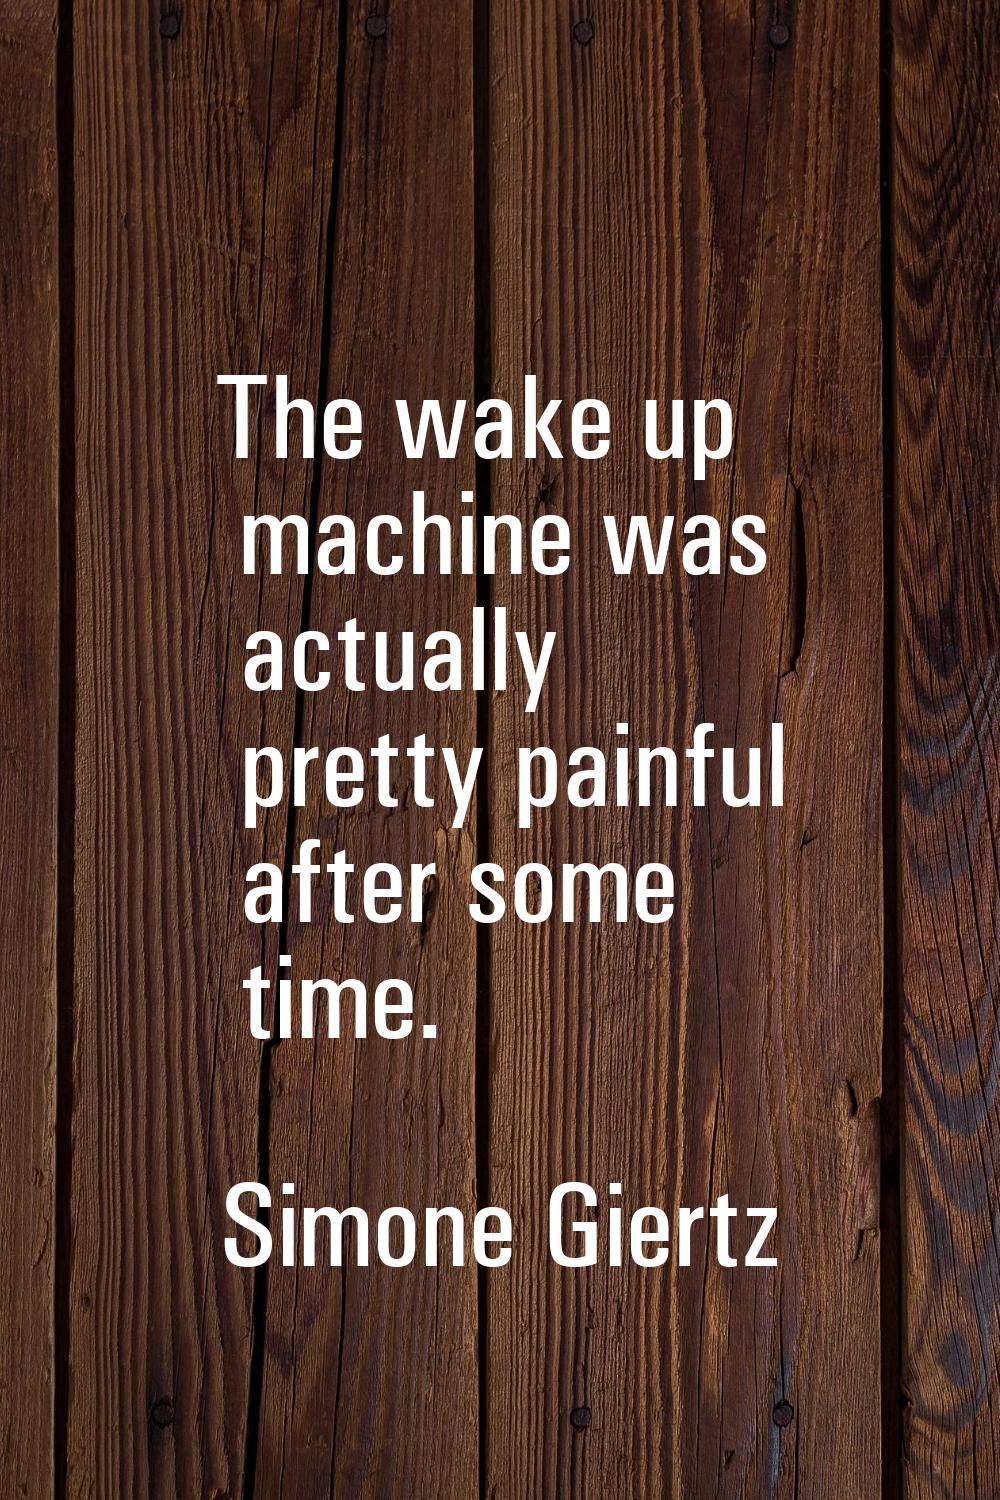 The wake up machine was actually pretty painful after some time.